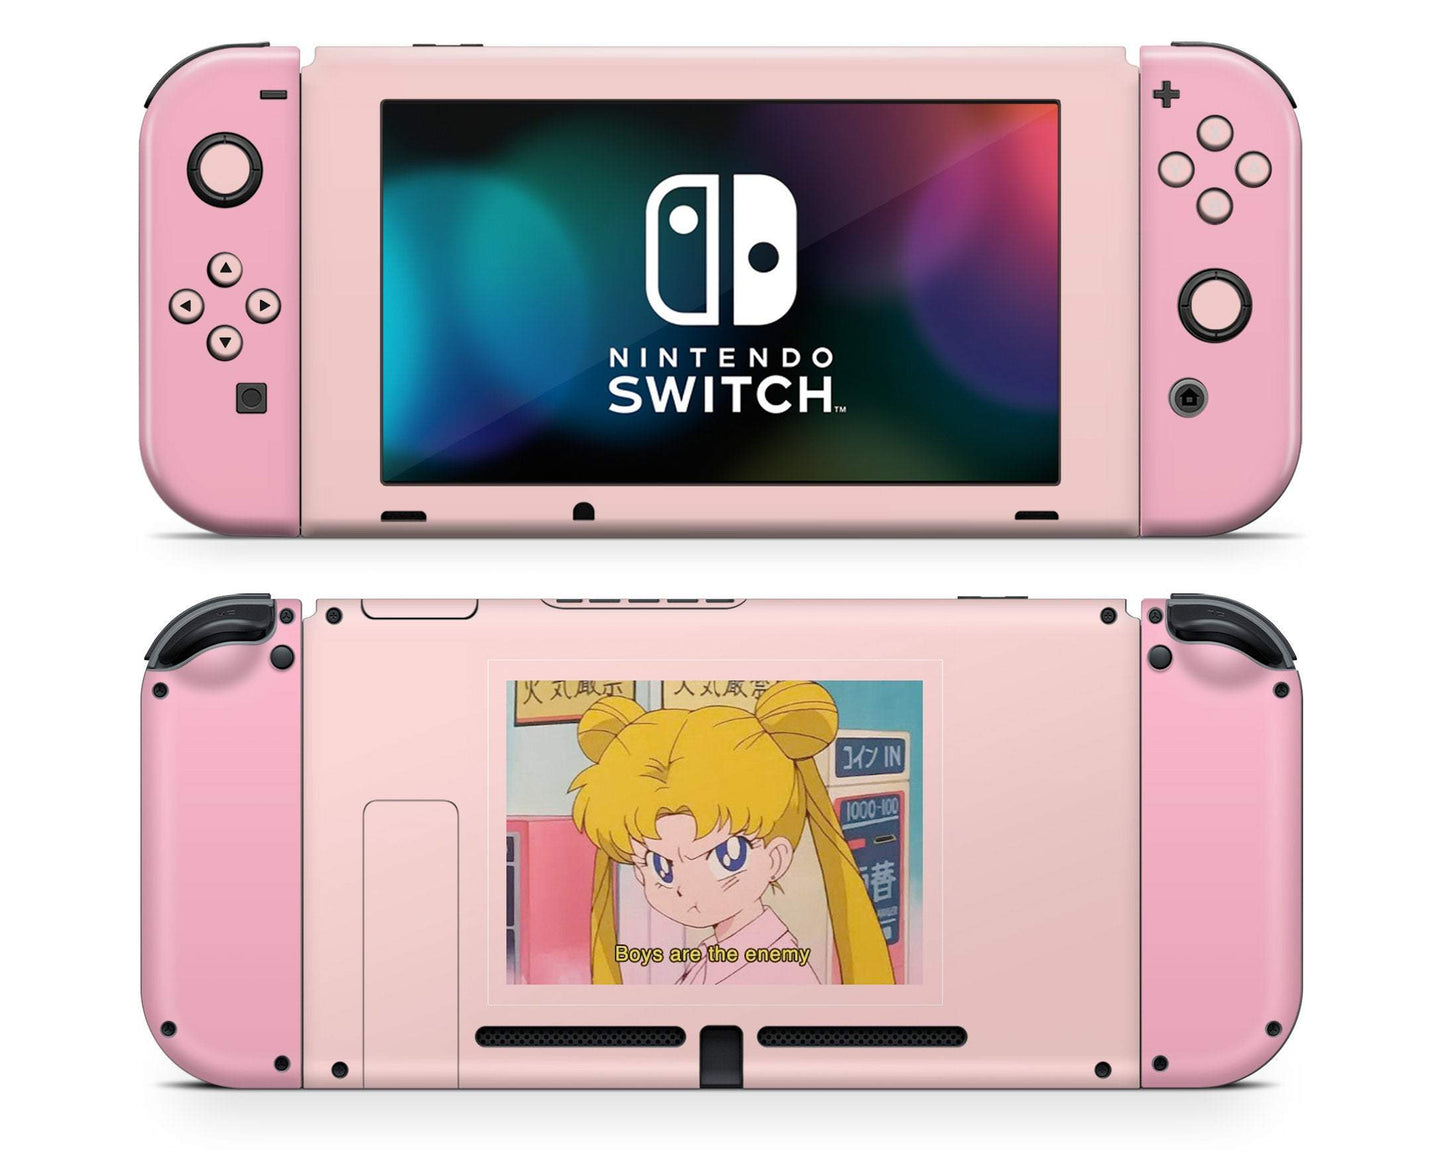 Lux Skins Nintendo Switch Sailor Moon Boys are the Enemy Full Set Skins - Pop culture Sailor Moon Skin